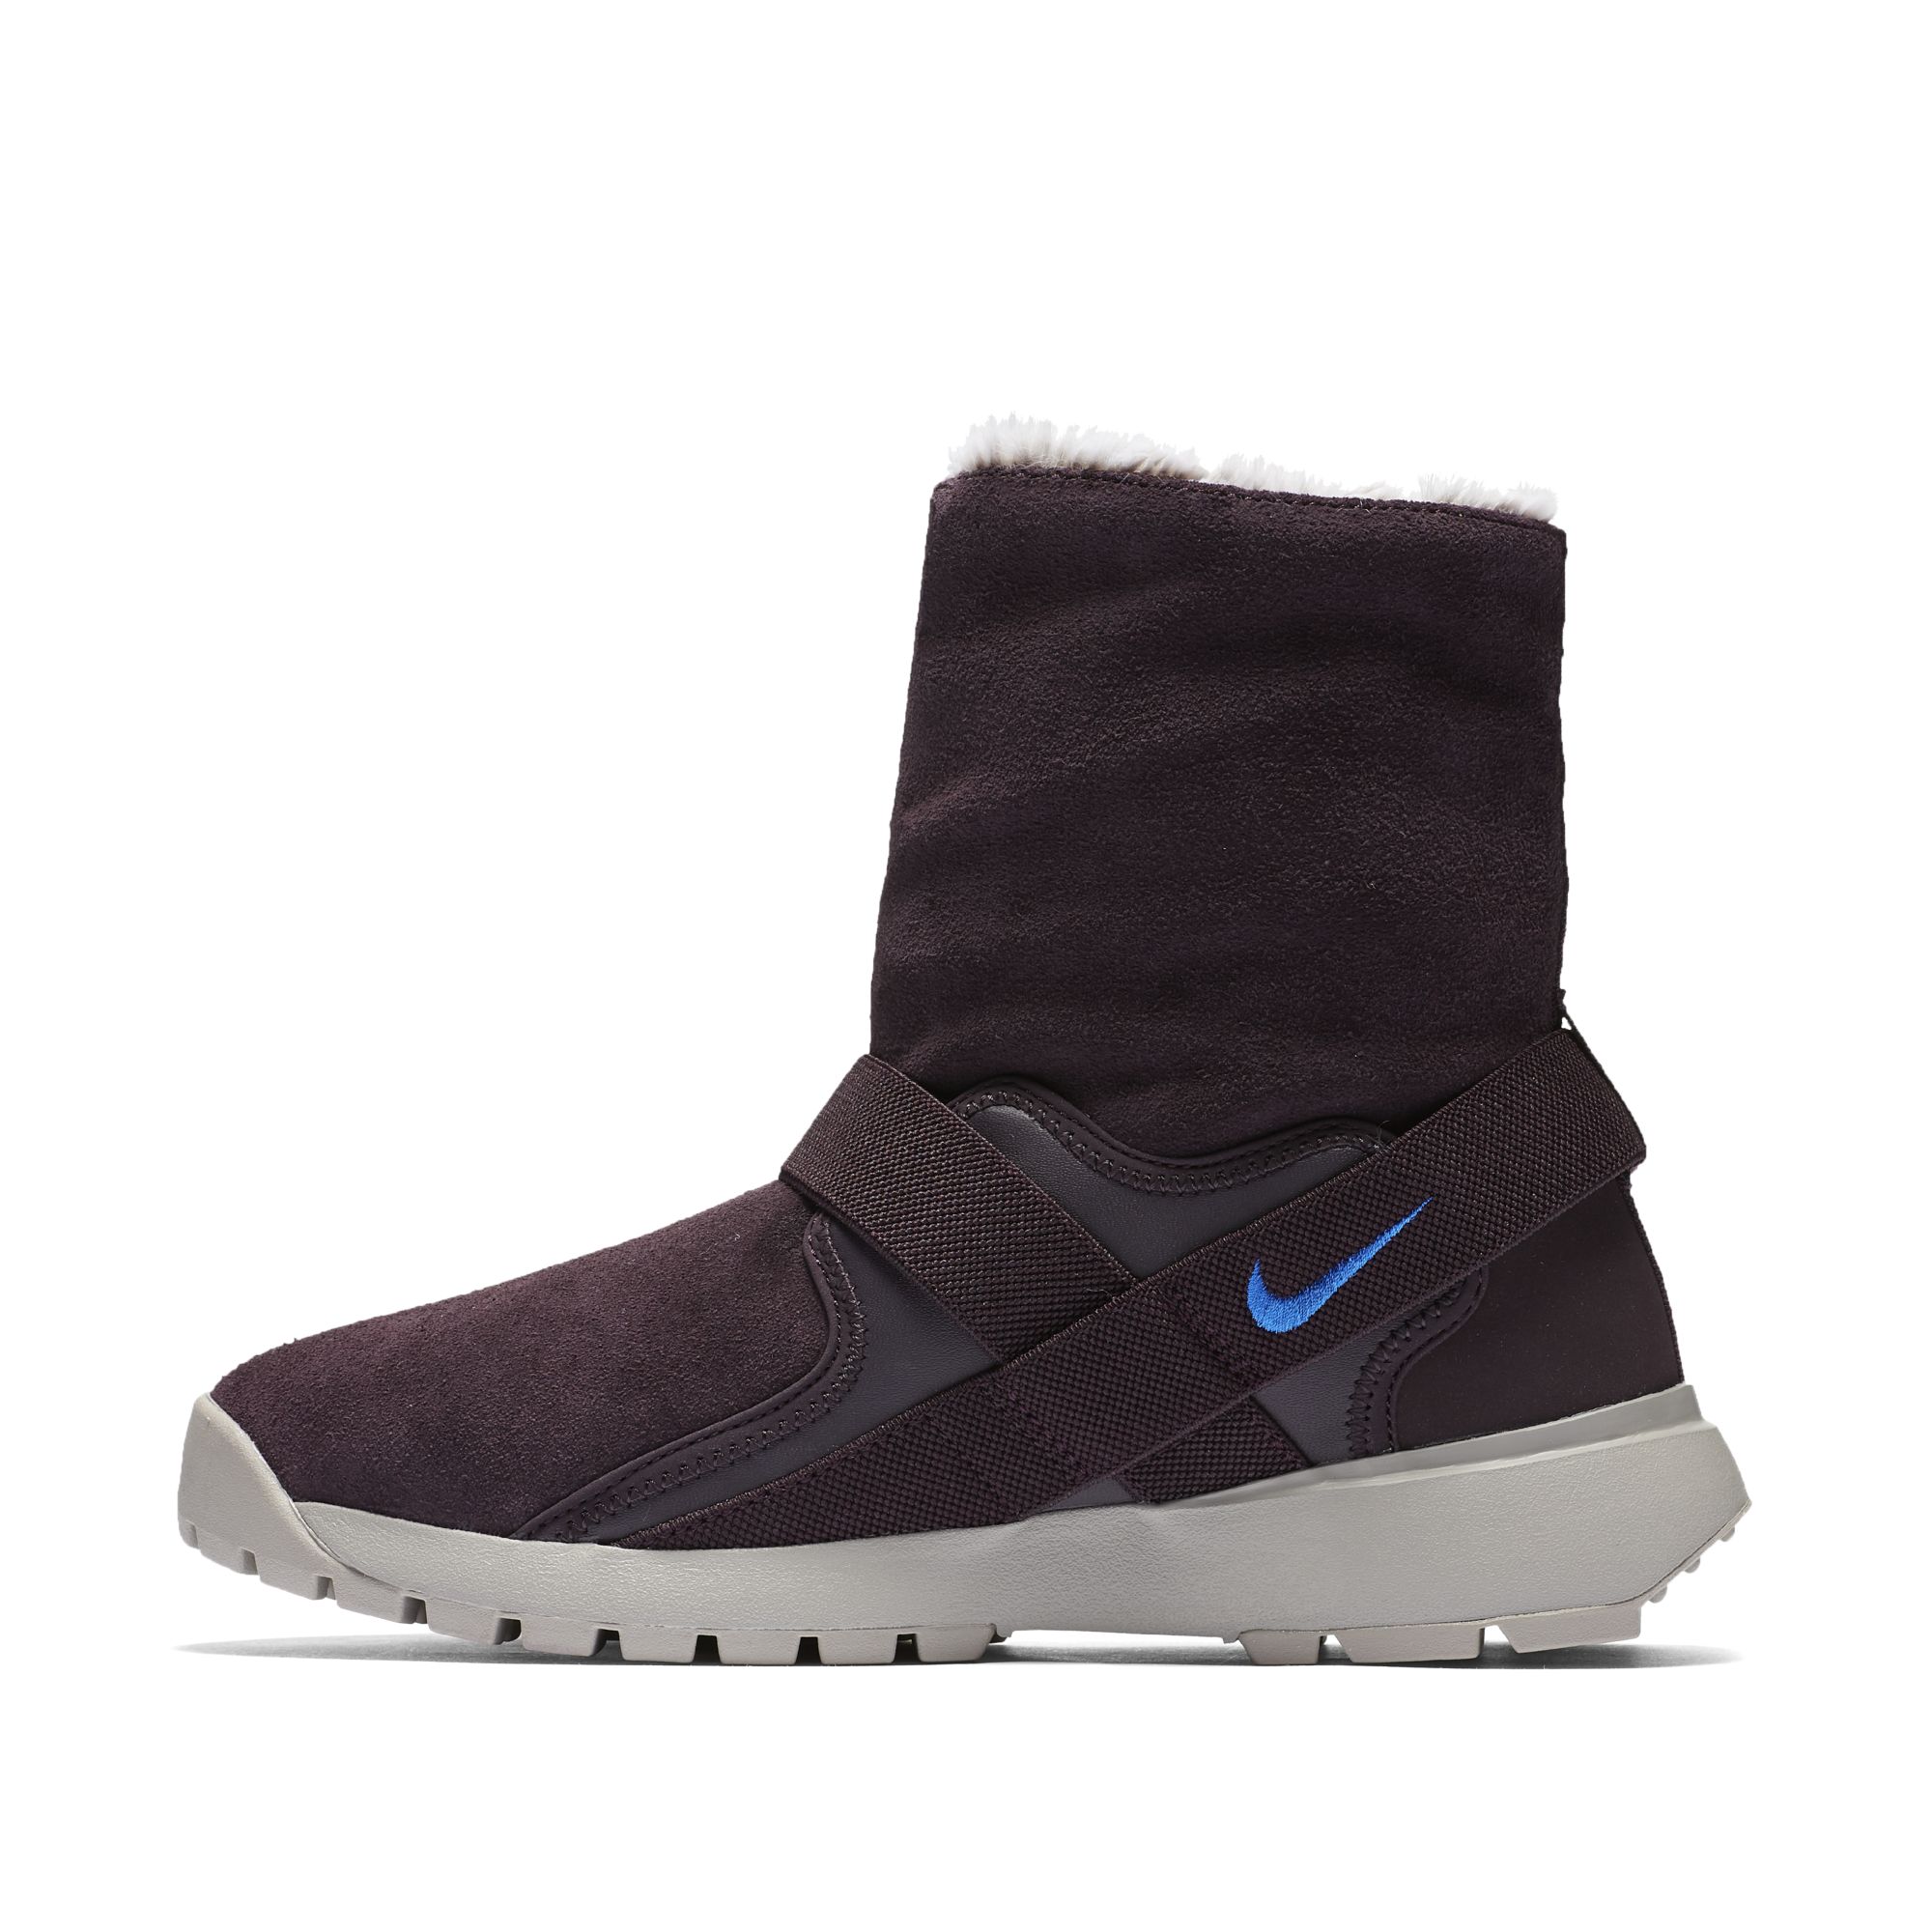 nike ugg boots off 56% -